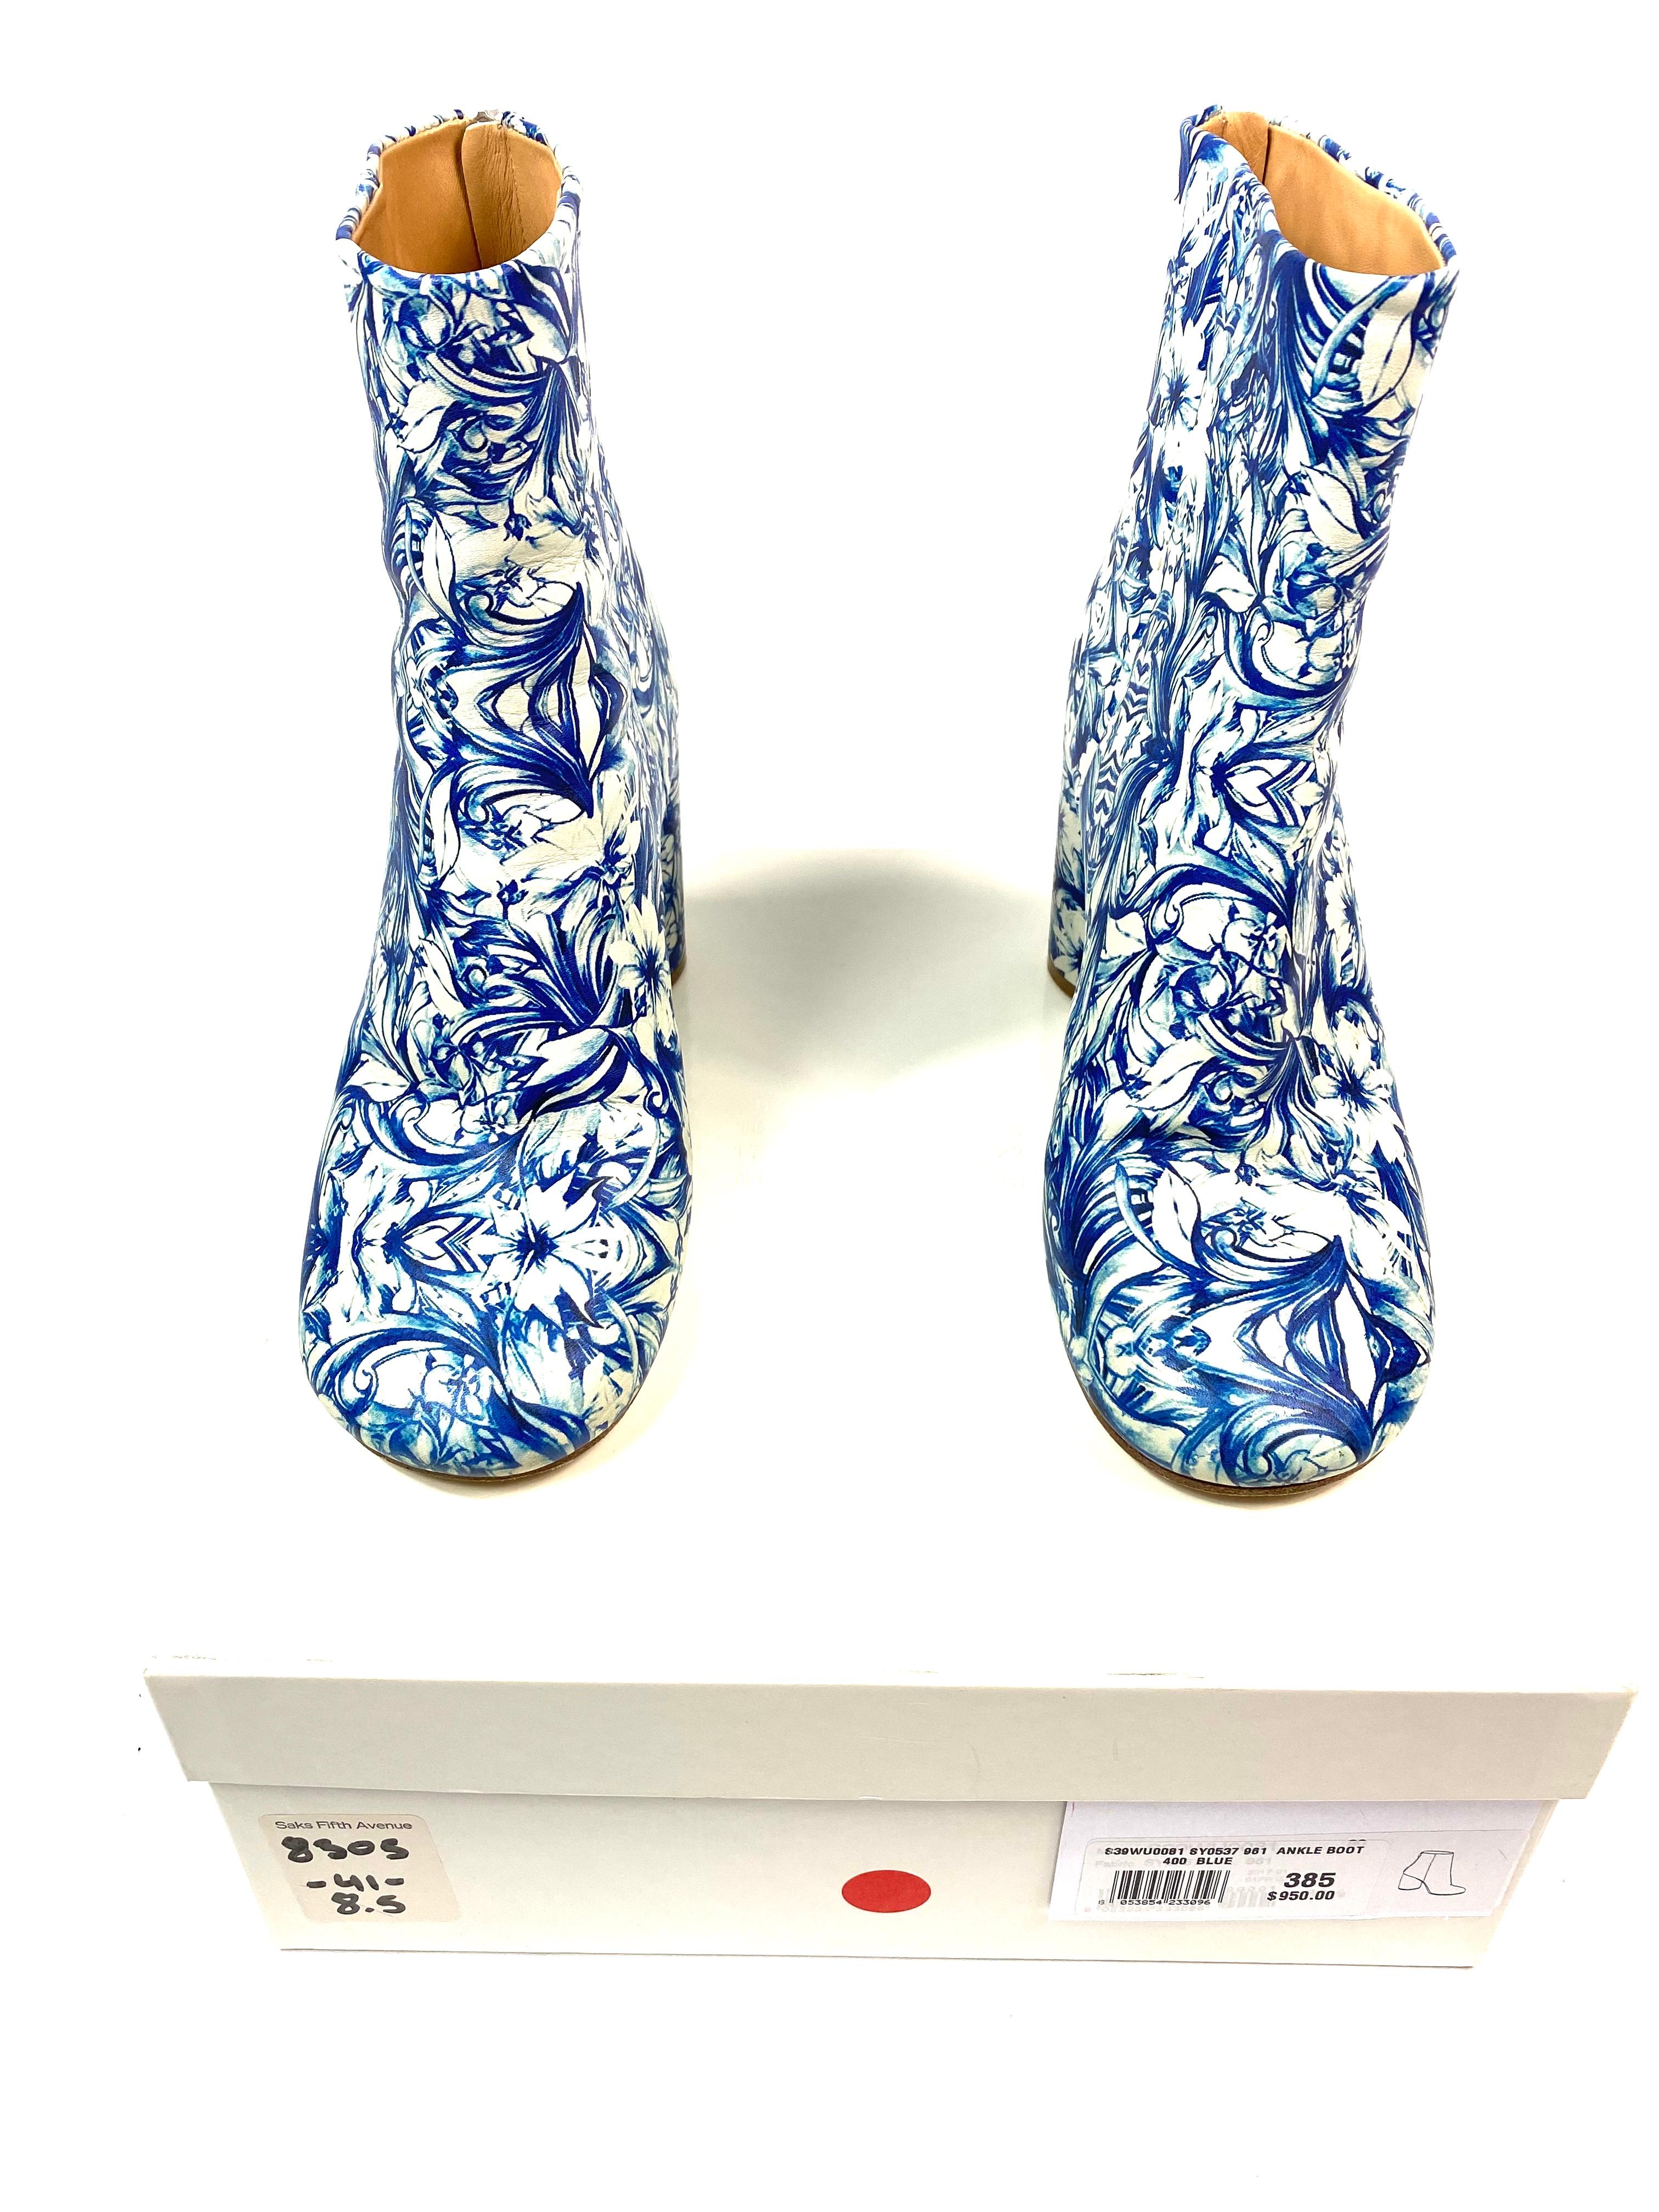 Women's MAISON MARGIELA White and Blue Floral Print Leather Block Heel Booties SIZE 38.5